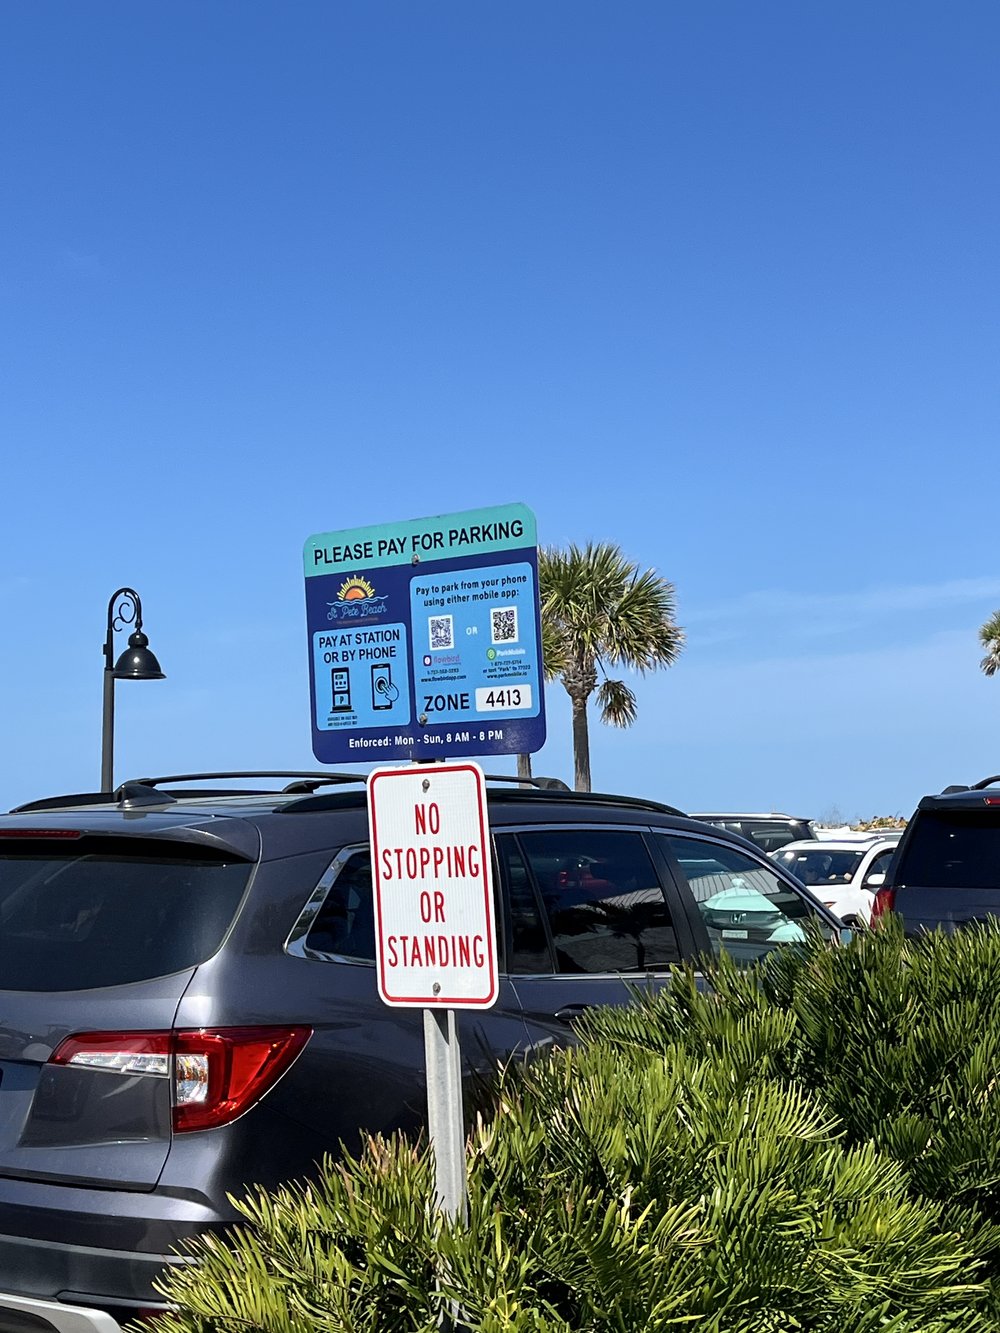 Pass-a-grille pay for parking sign Florida.jpg